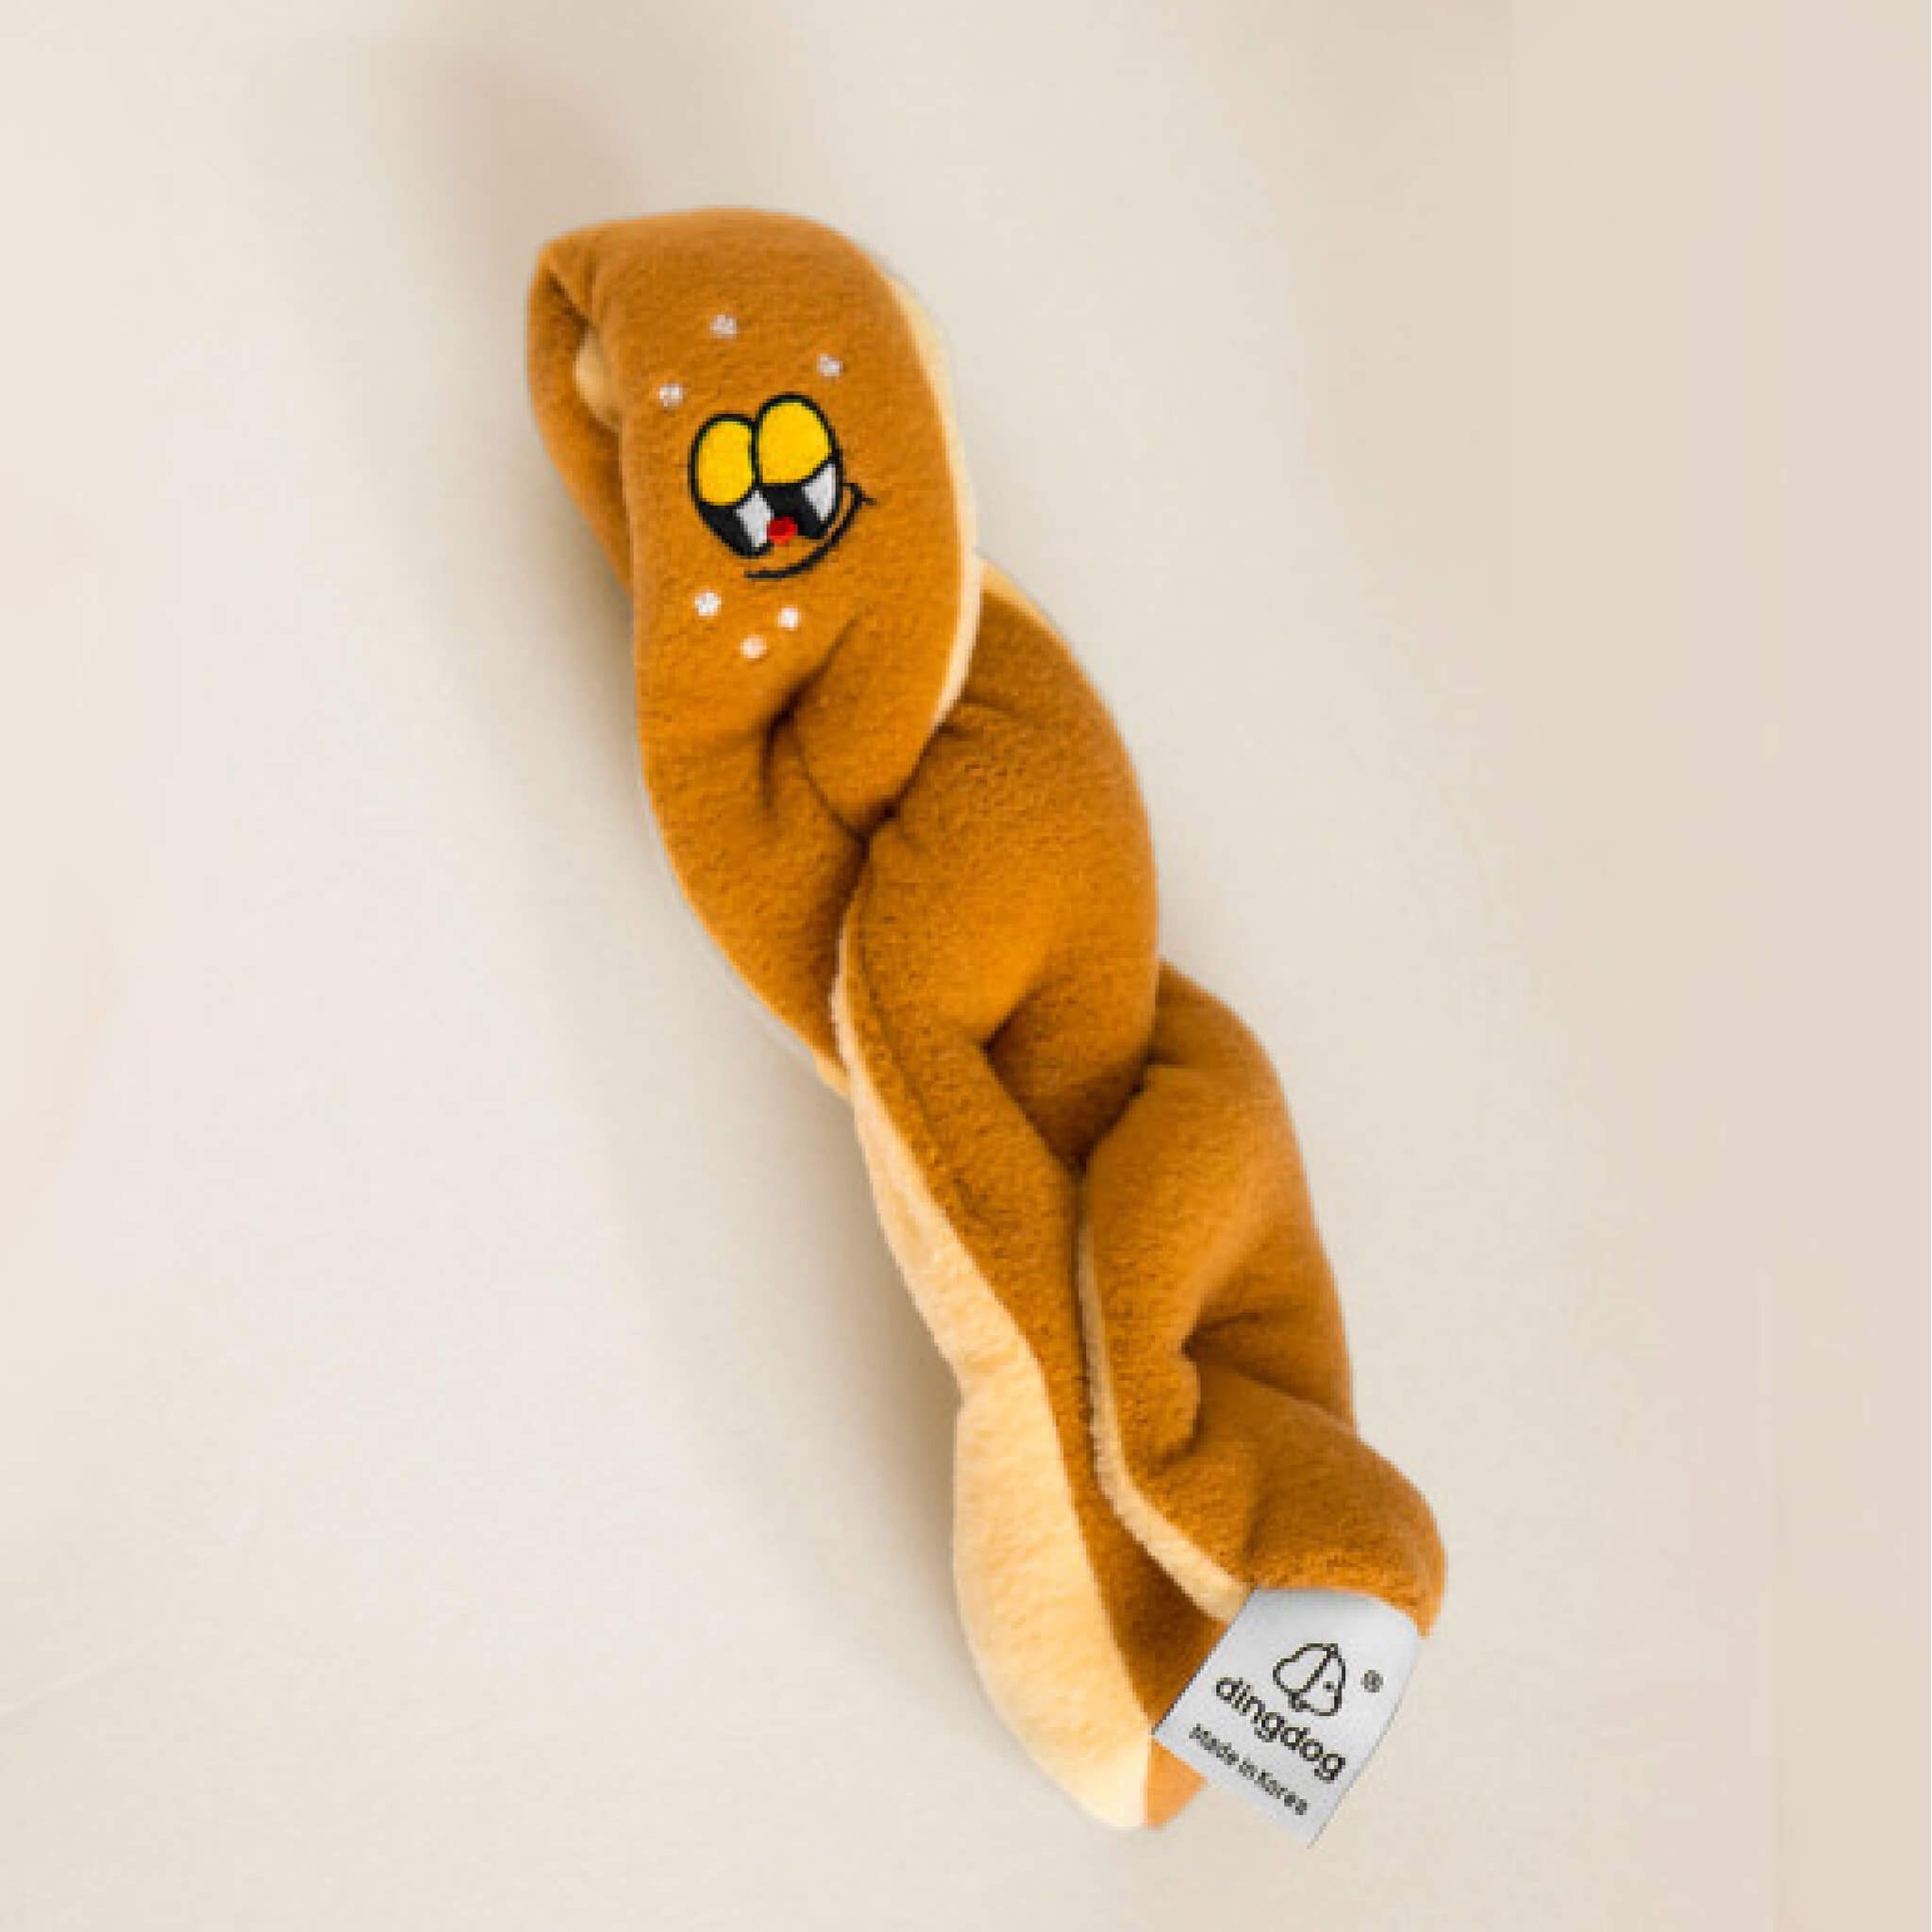 Twisted bread nosework toy.